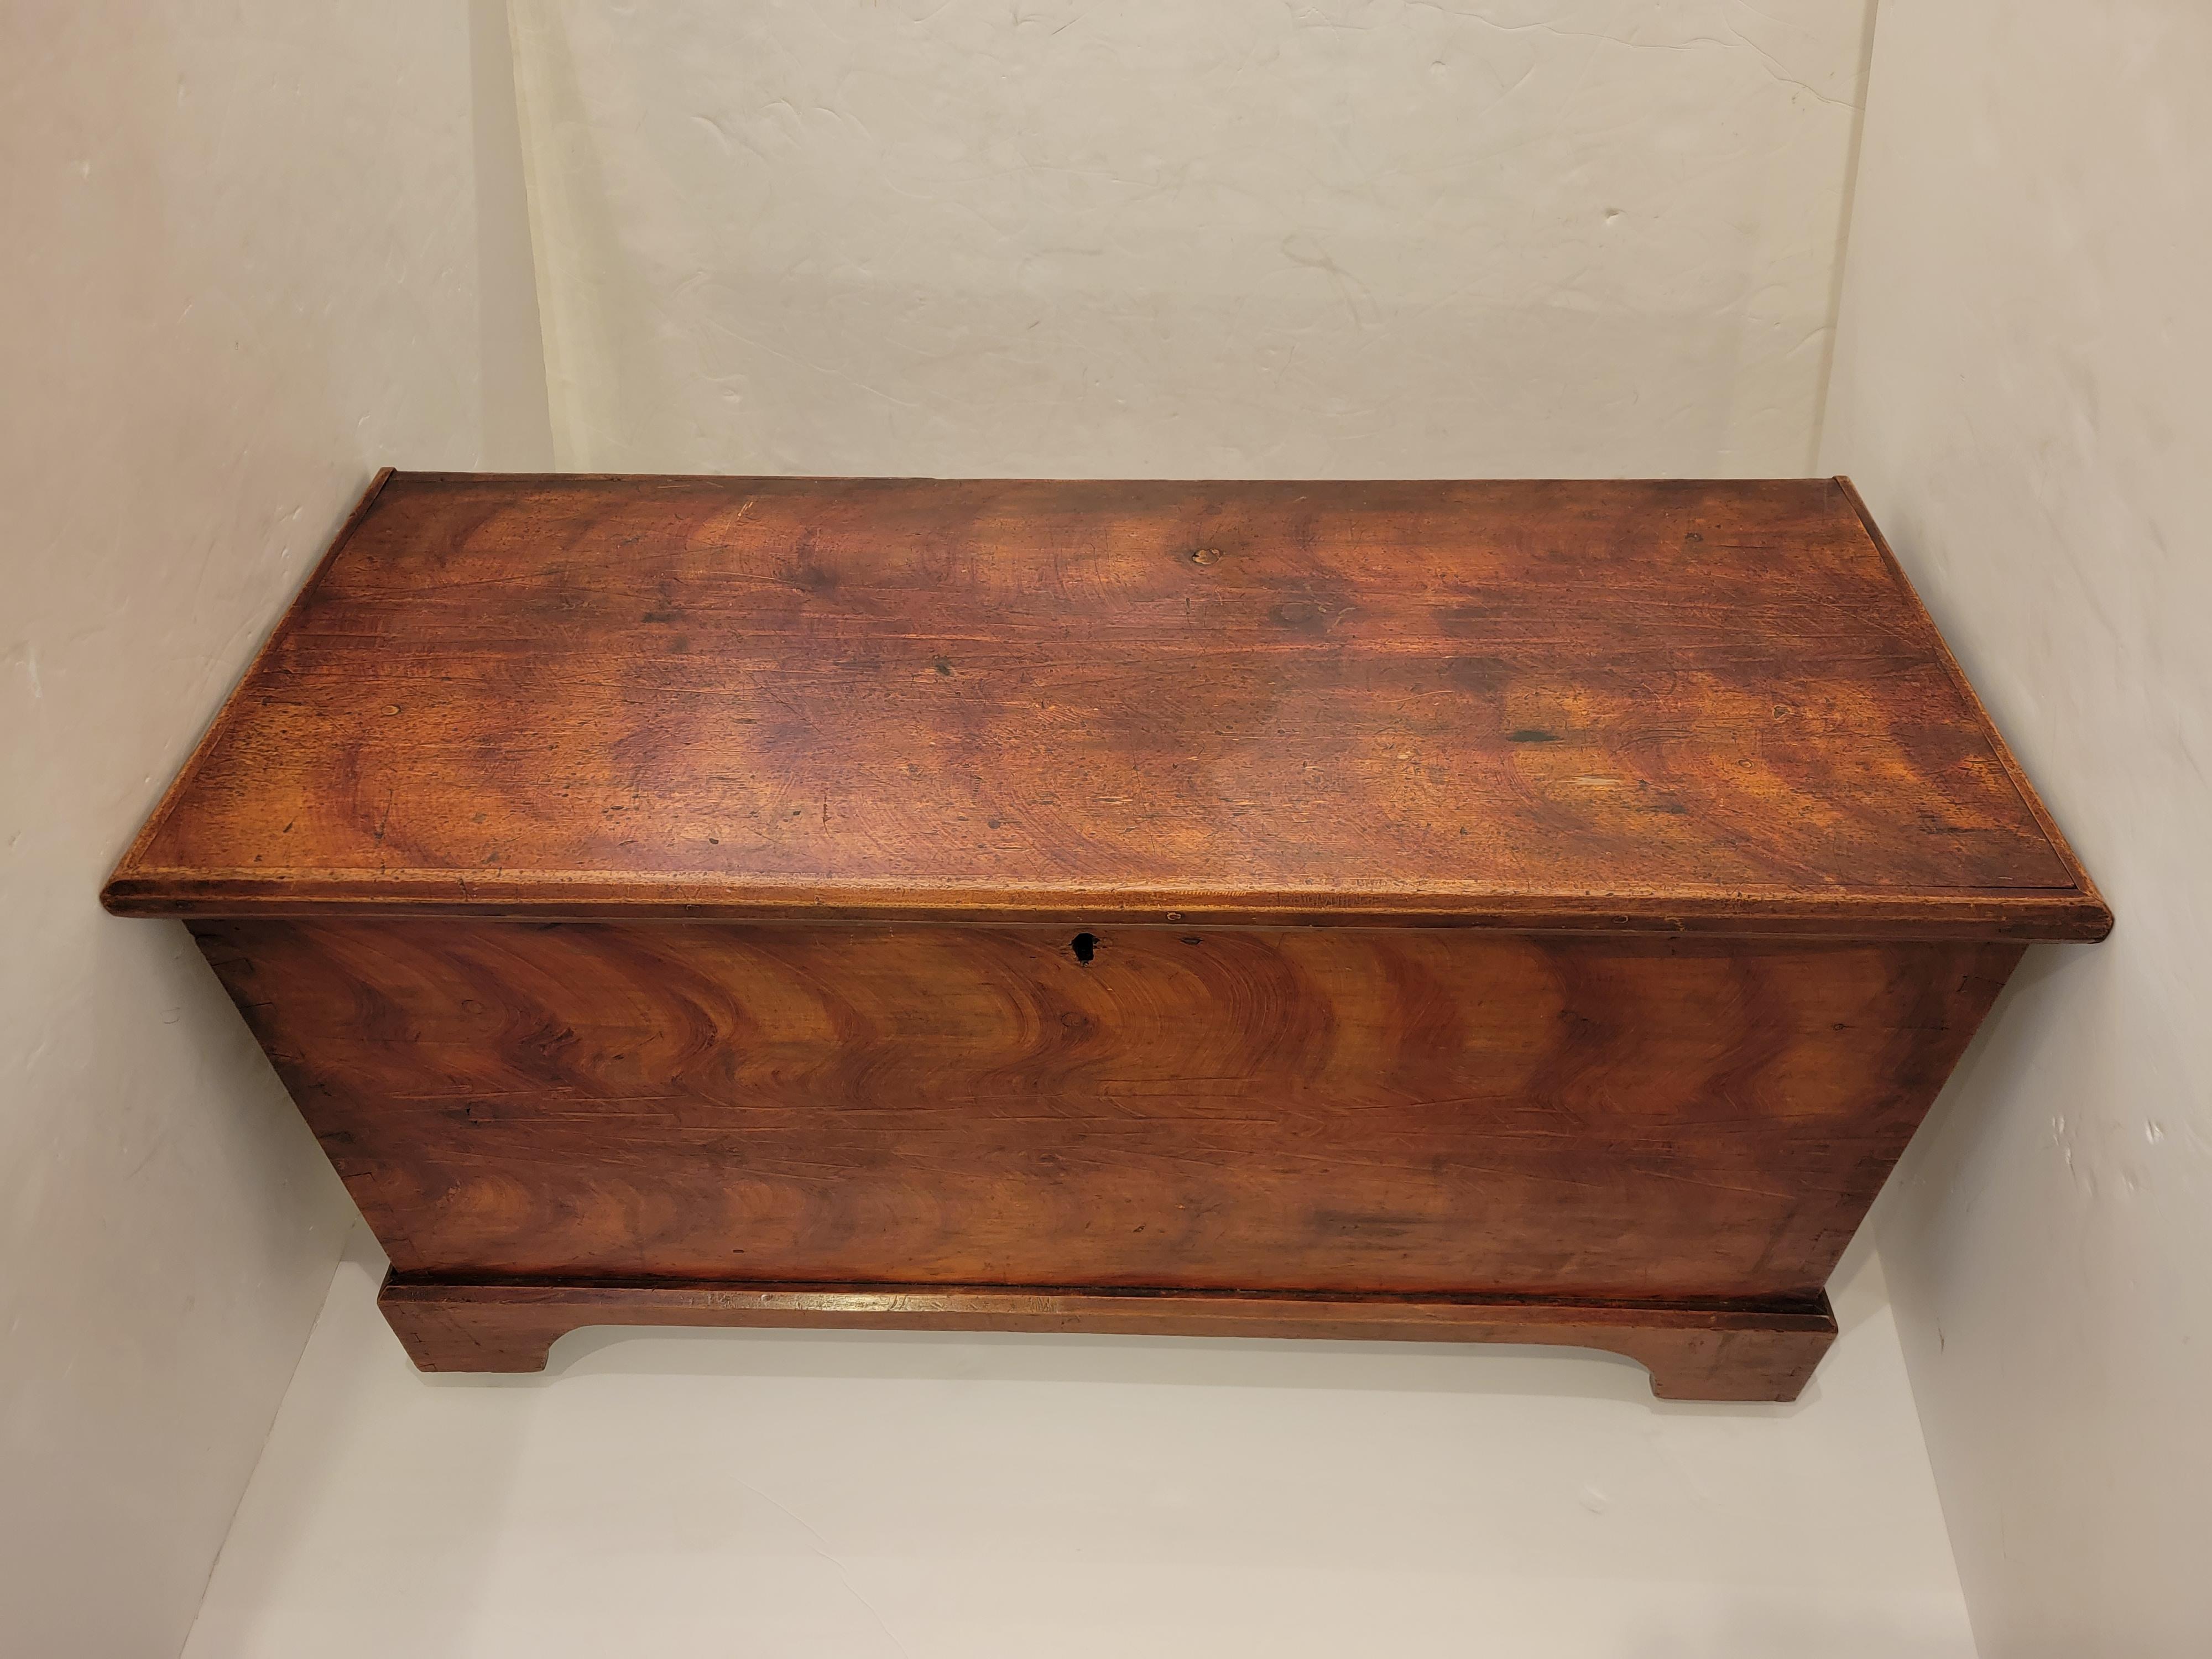 Versatile character rich antique American pine trunk having great storage inside and casters on the bottom. Perfect at the end of a bed. Can also be used as a coffee table.